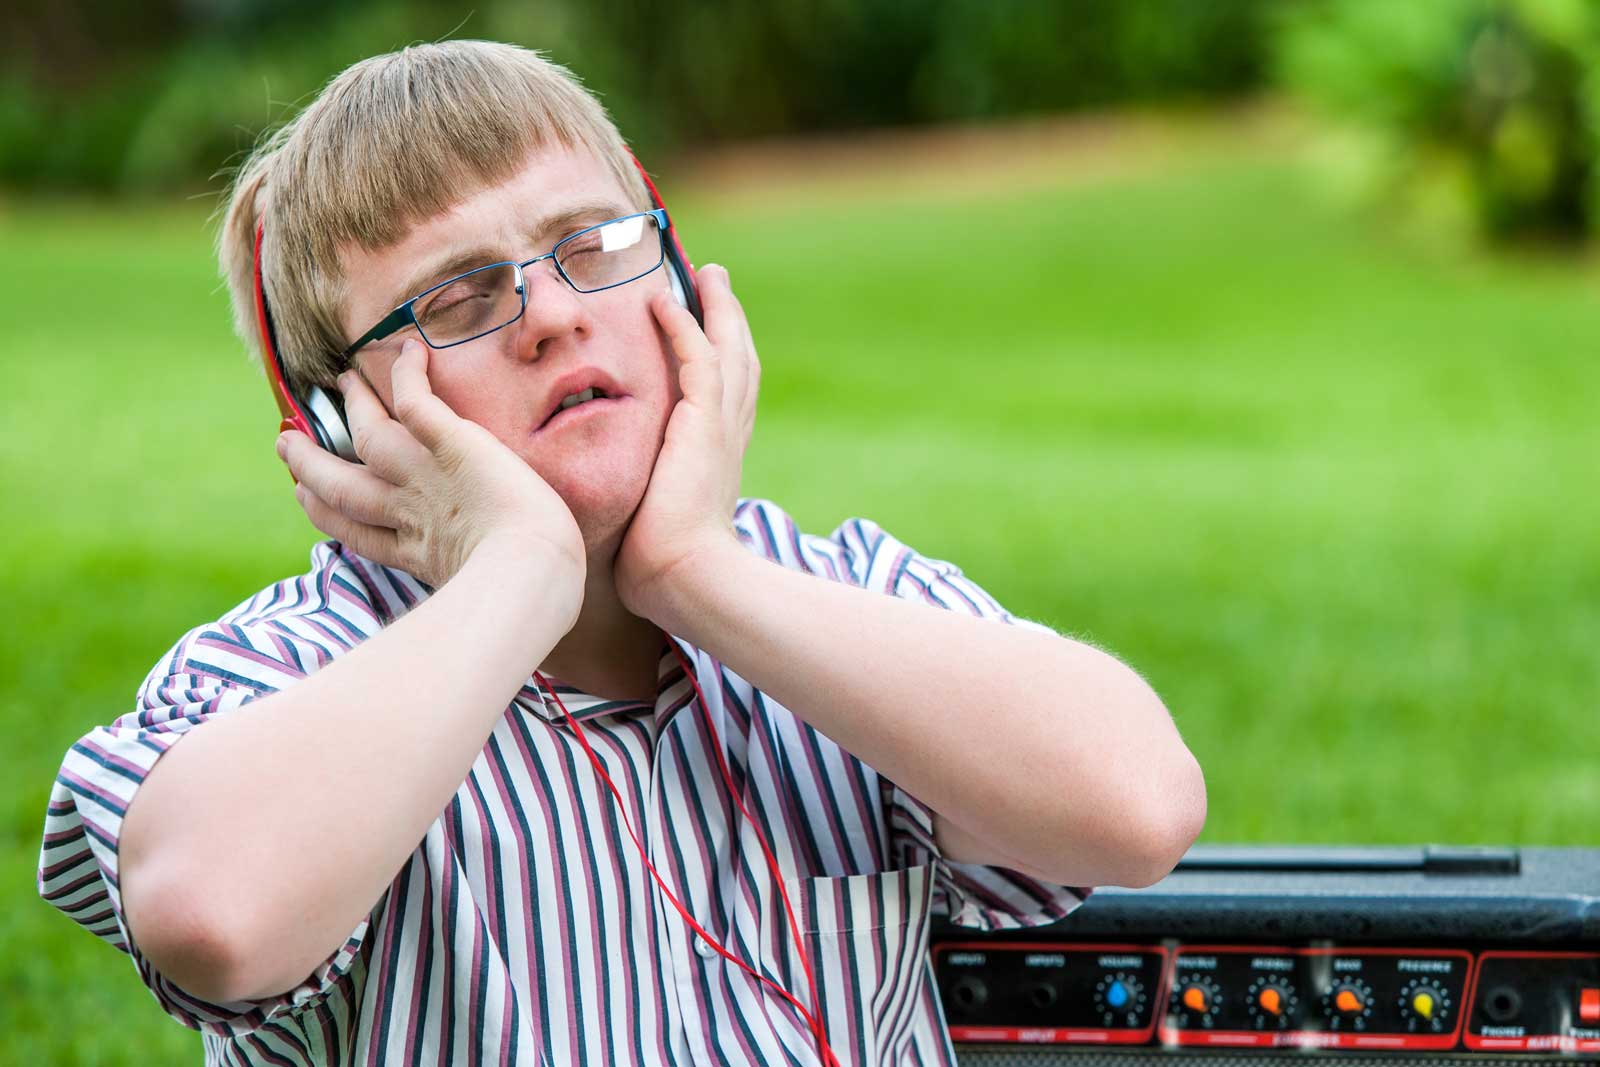 My Son with Down Syndrome Is Very Fond of Music